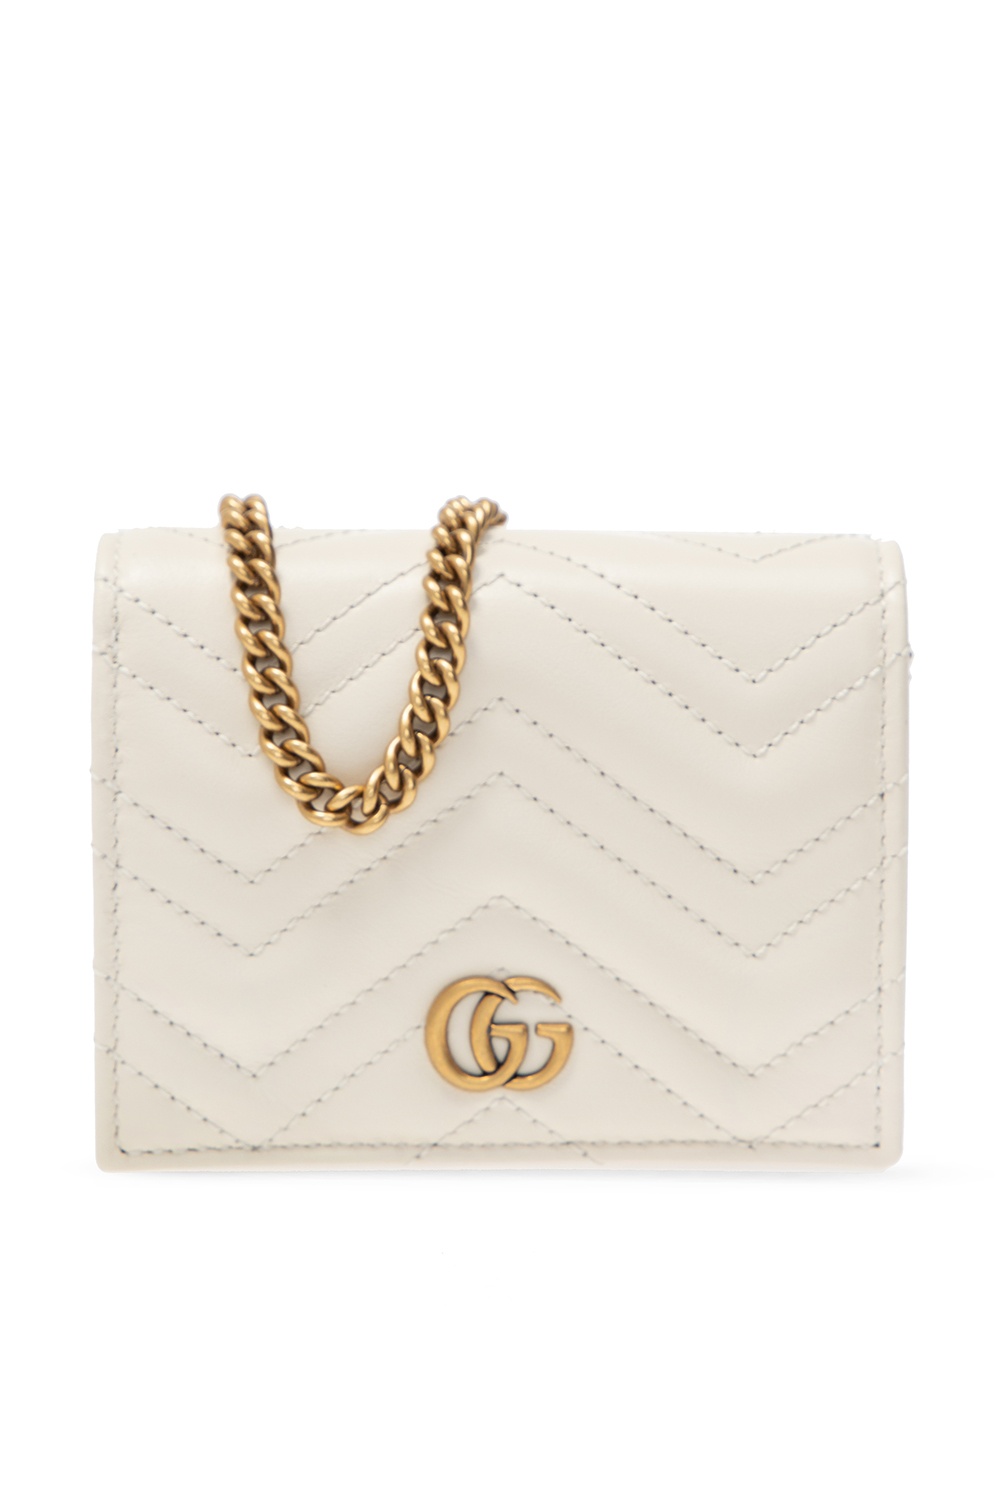 gucci marmont wallet on a chain